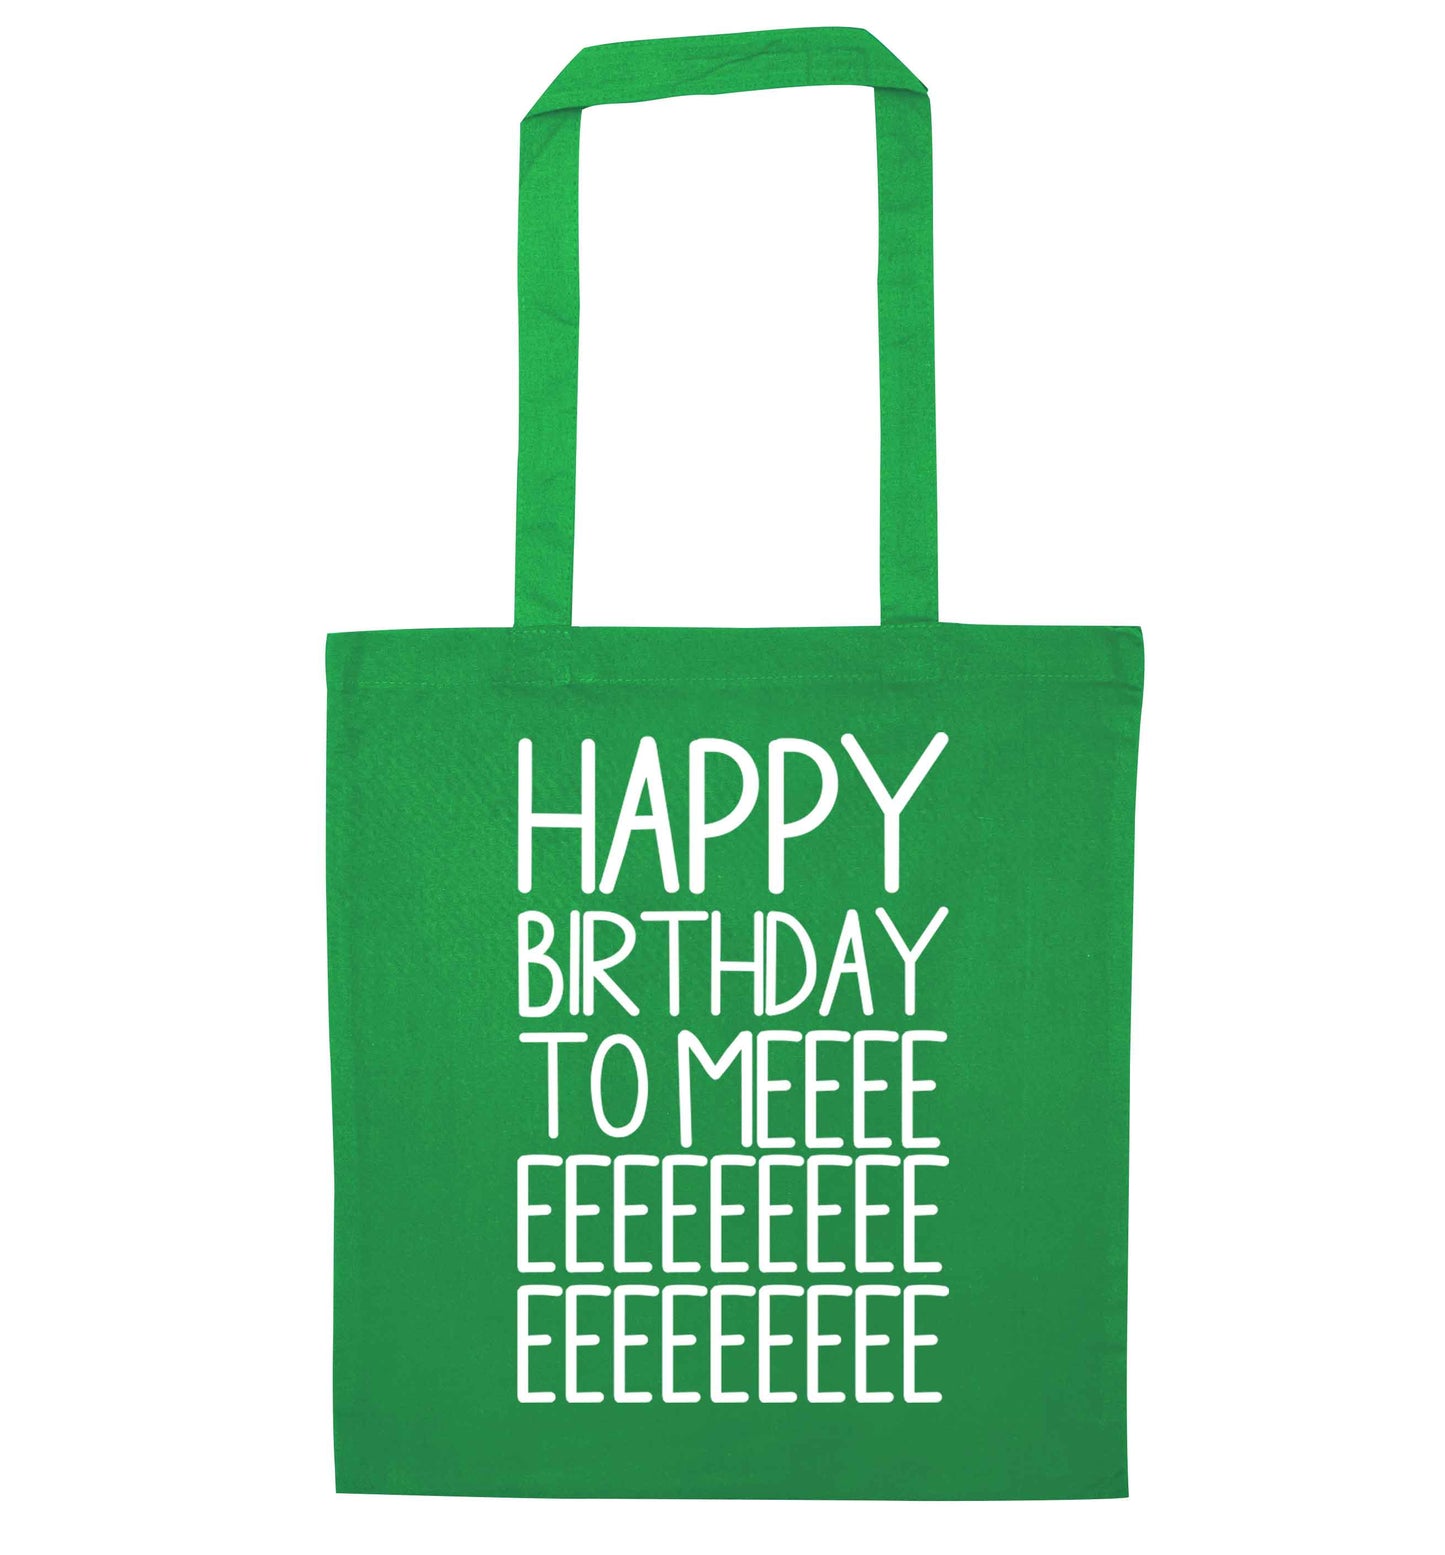 Happy birthday to me green tote bag